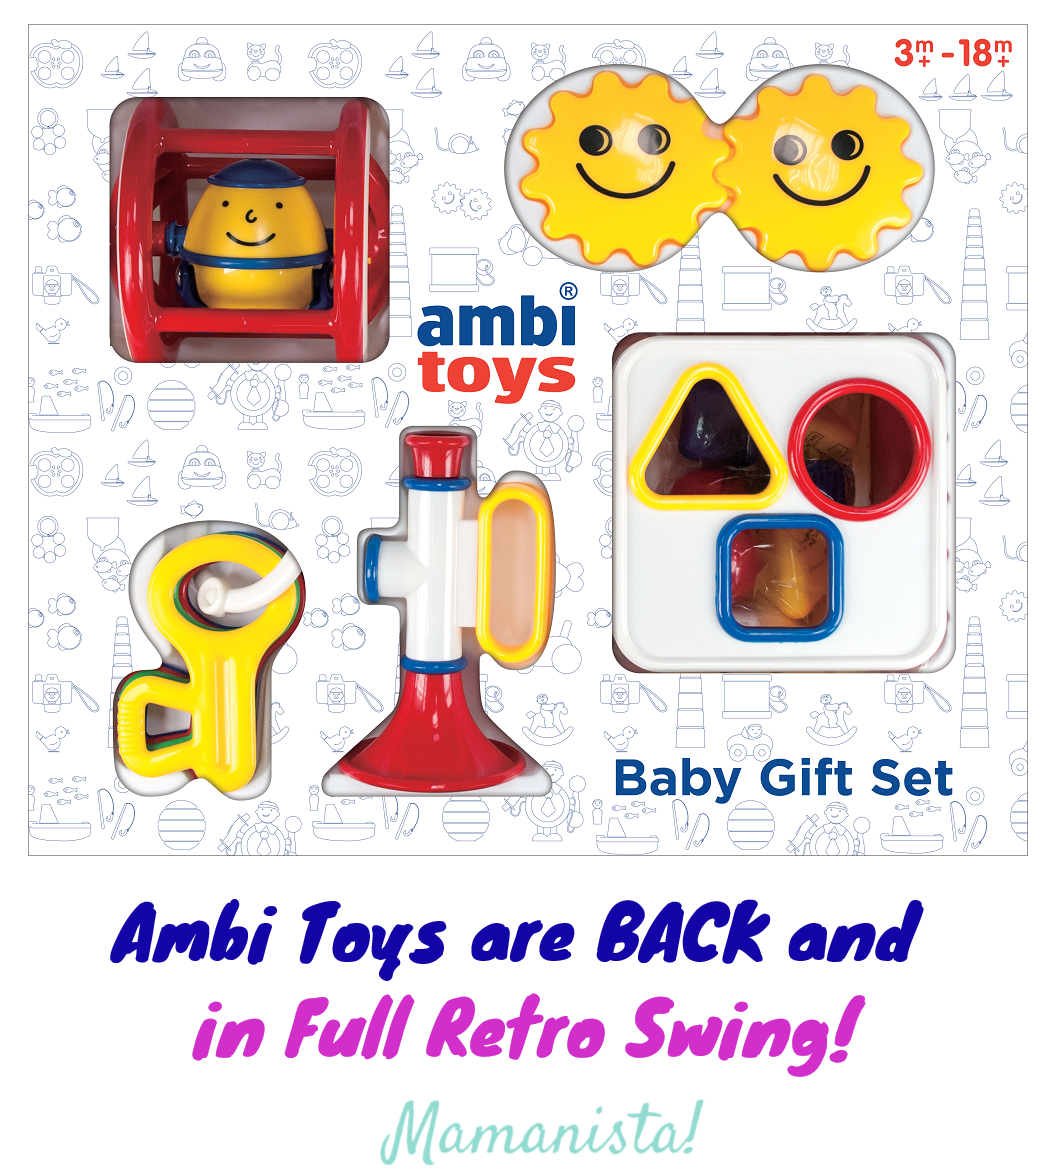 Ambi Toys are BACK and in Full Retro Swing!